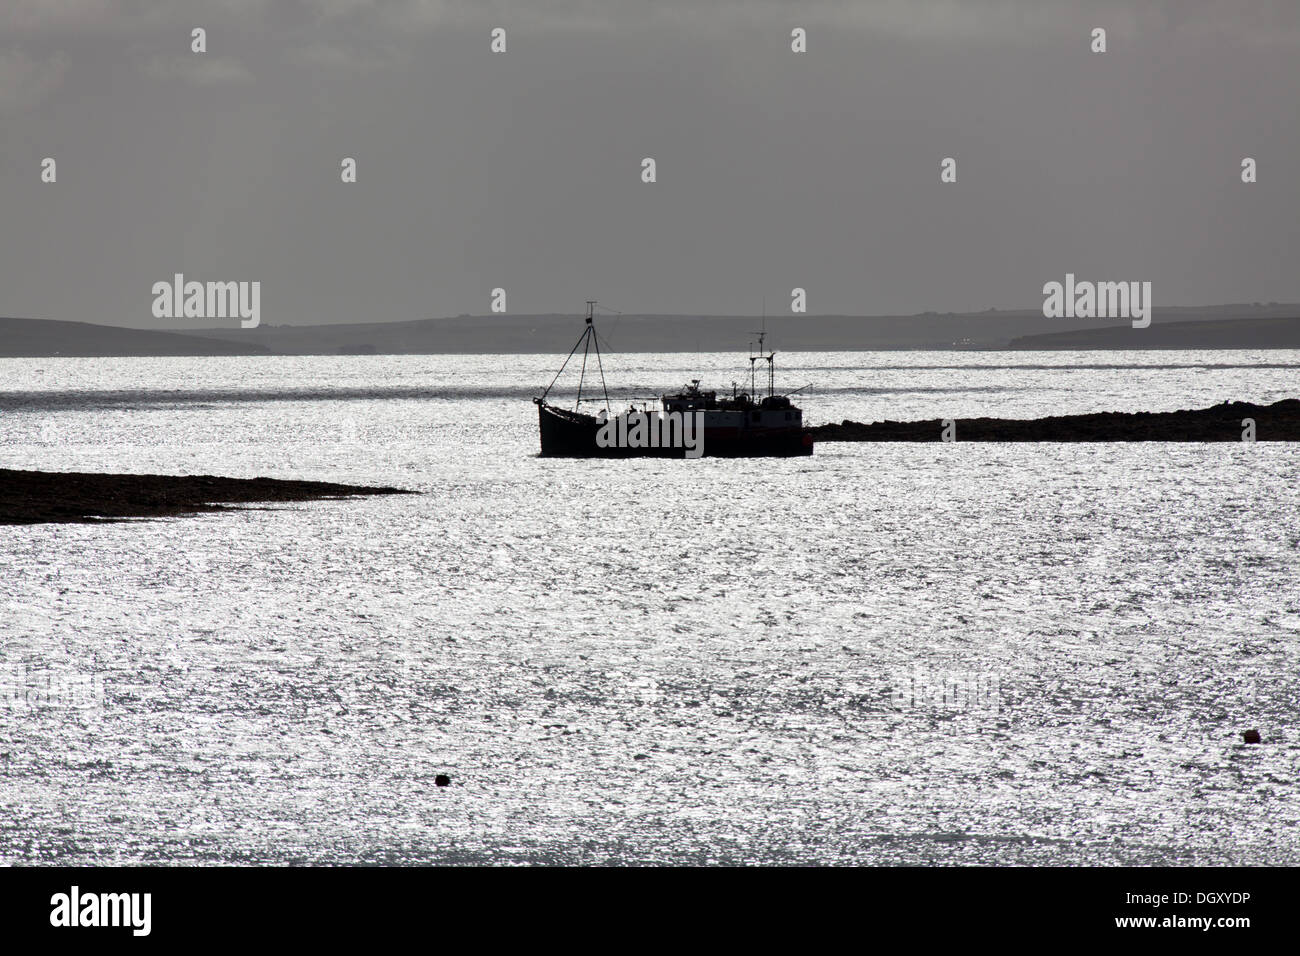 Islands of Orkney, Scotland. Picturesque silhouetted view of a ferry leaving the Houton ferry terminal in the Bay of Houton. Stock Photo